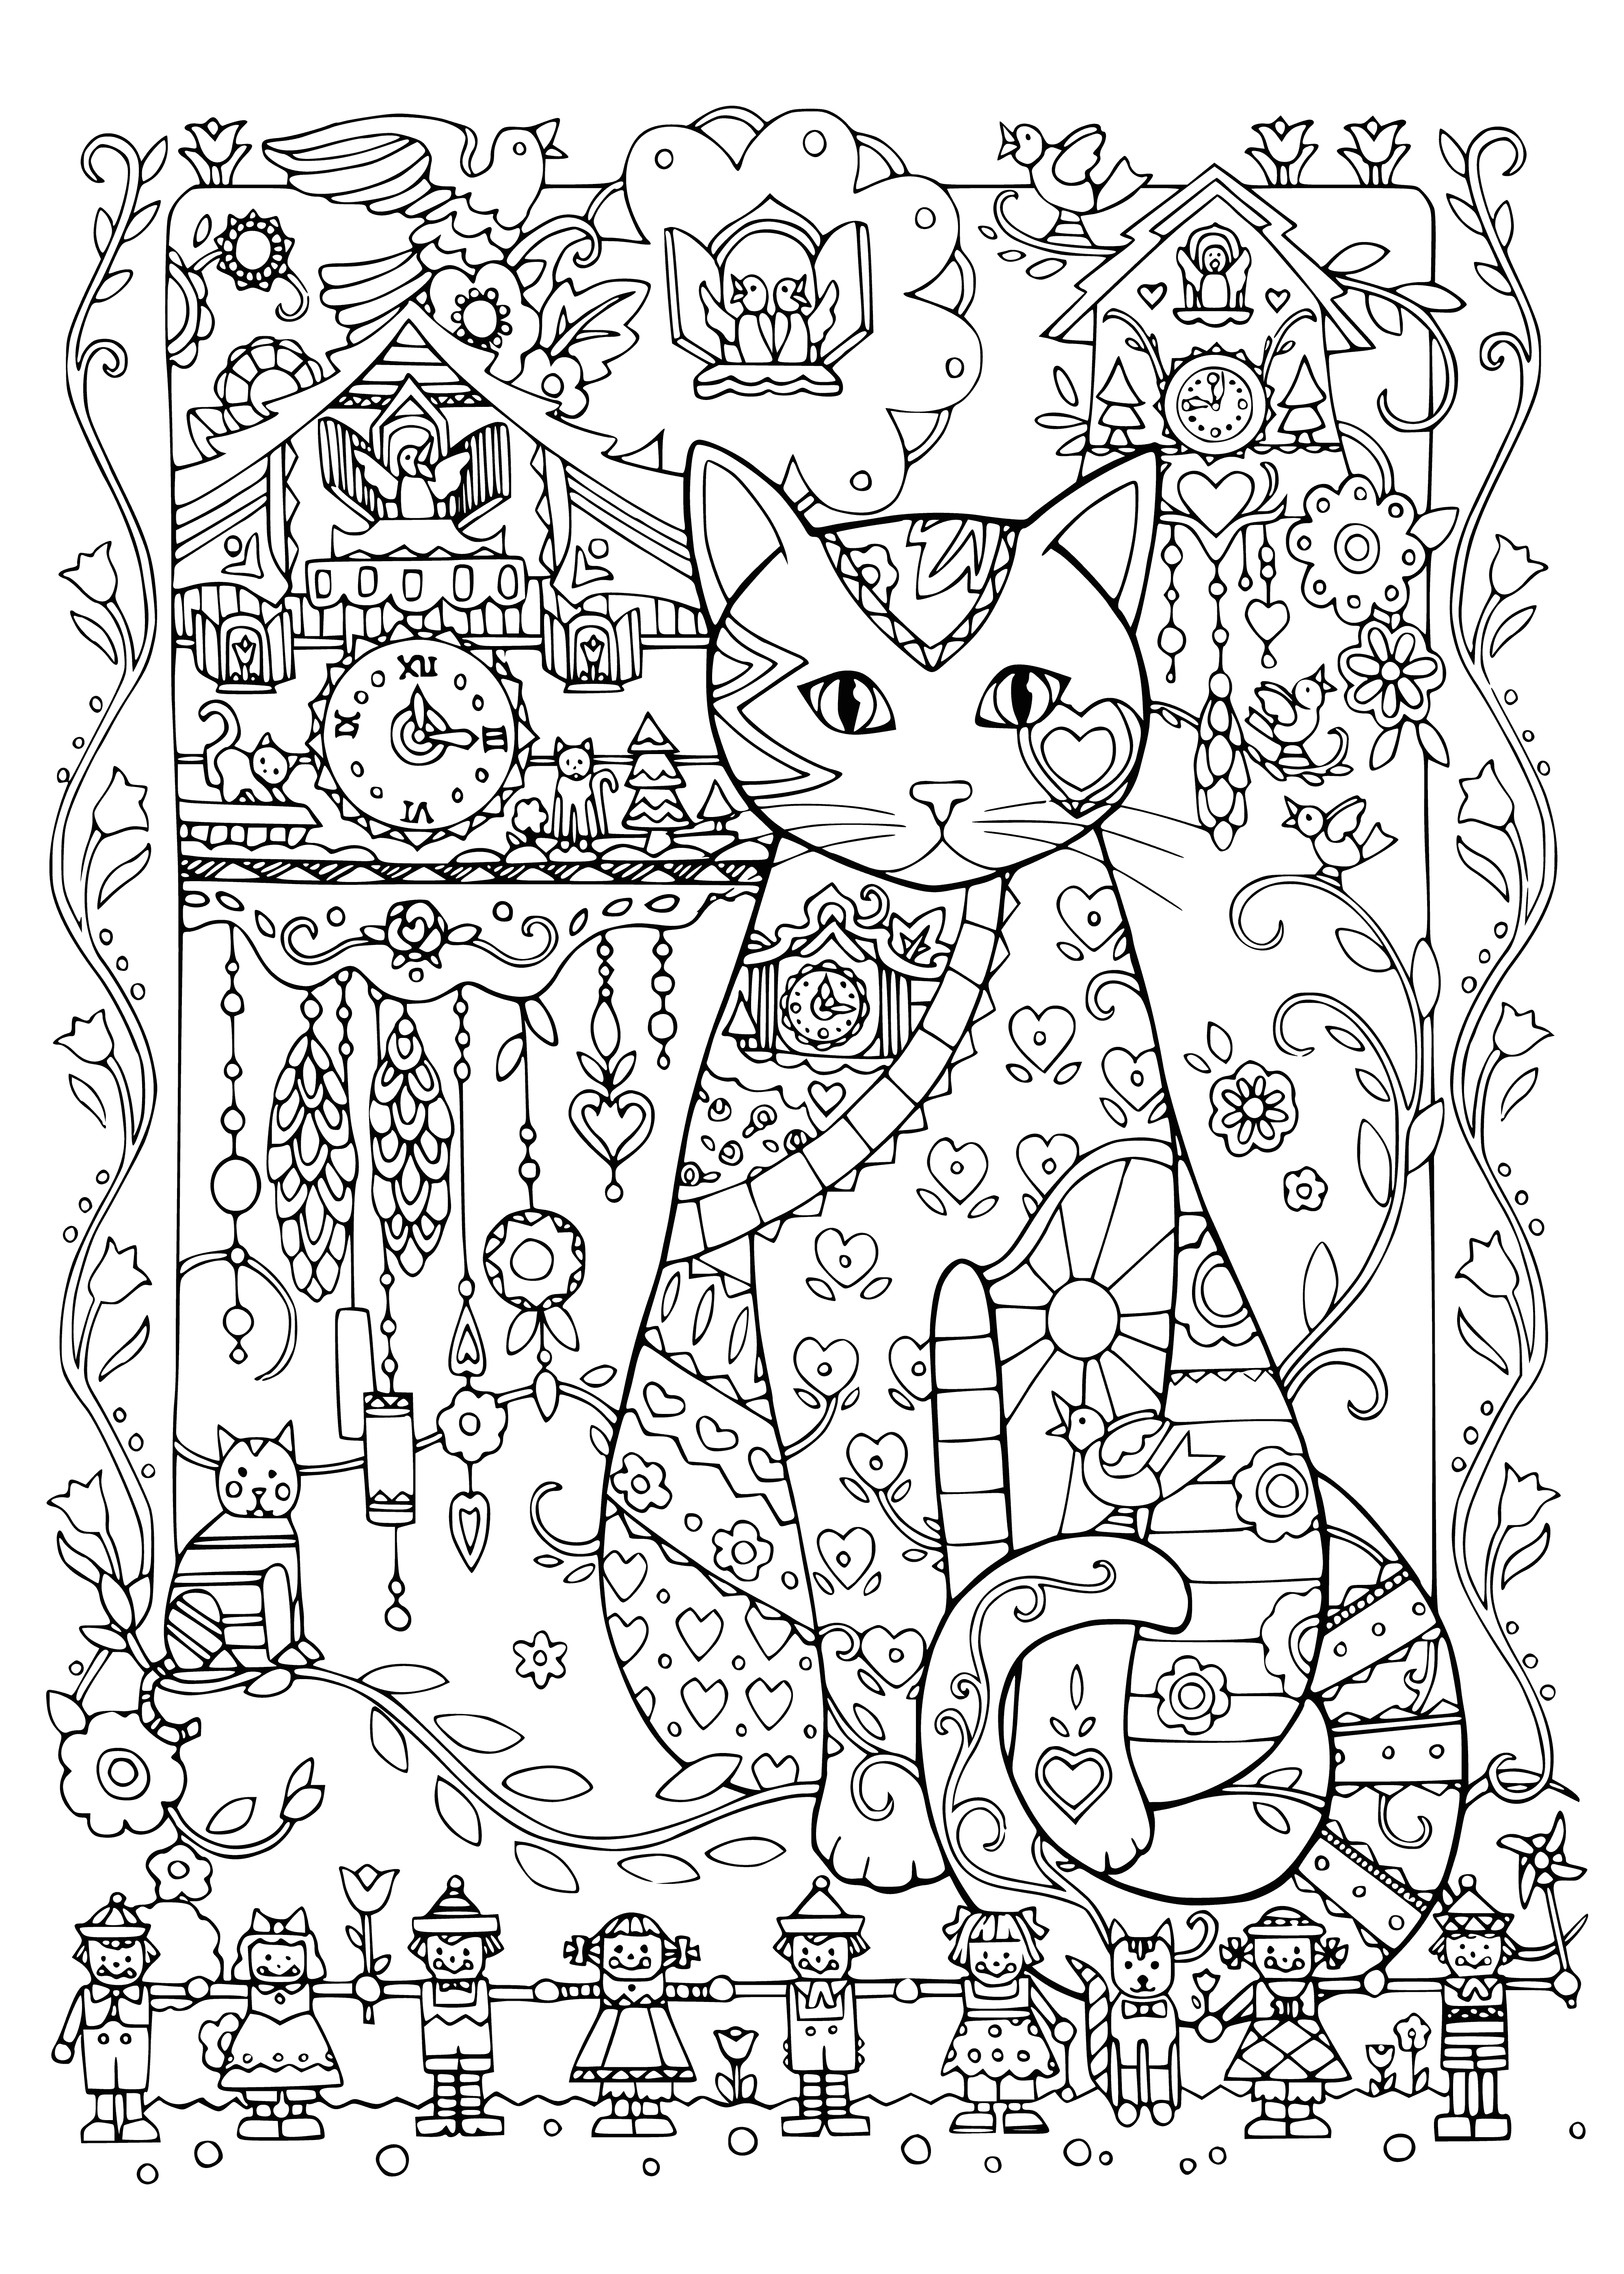 coloring page: Cat is at bench, moving gear with paw, surrounded by gears & cogs; serious expression on face. #catsofinstagram